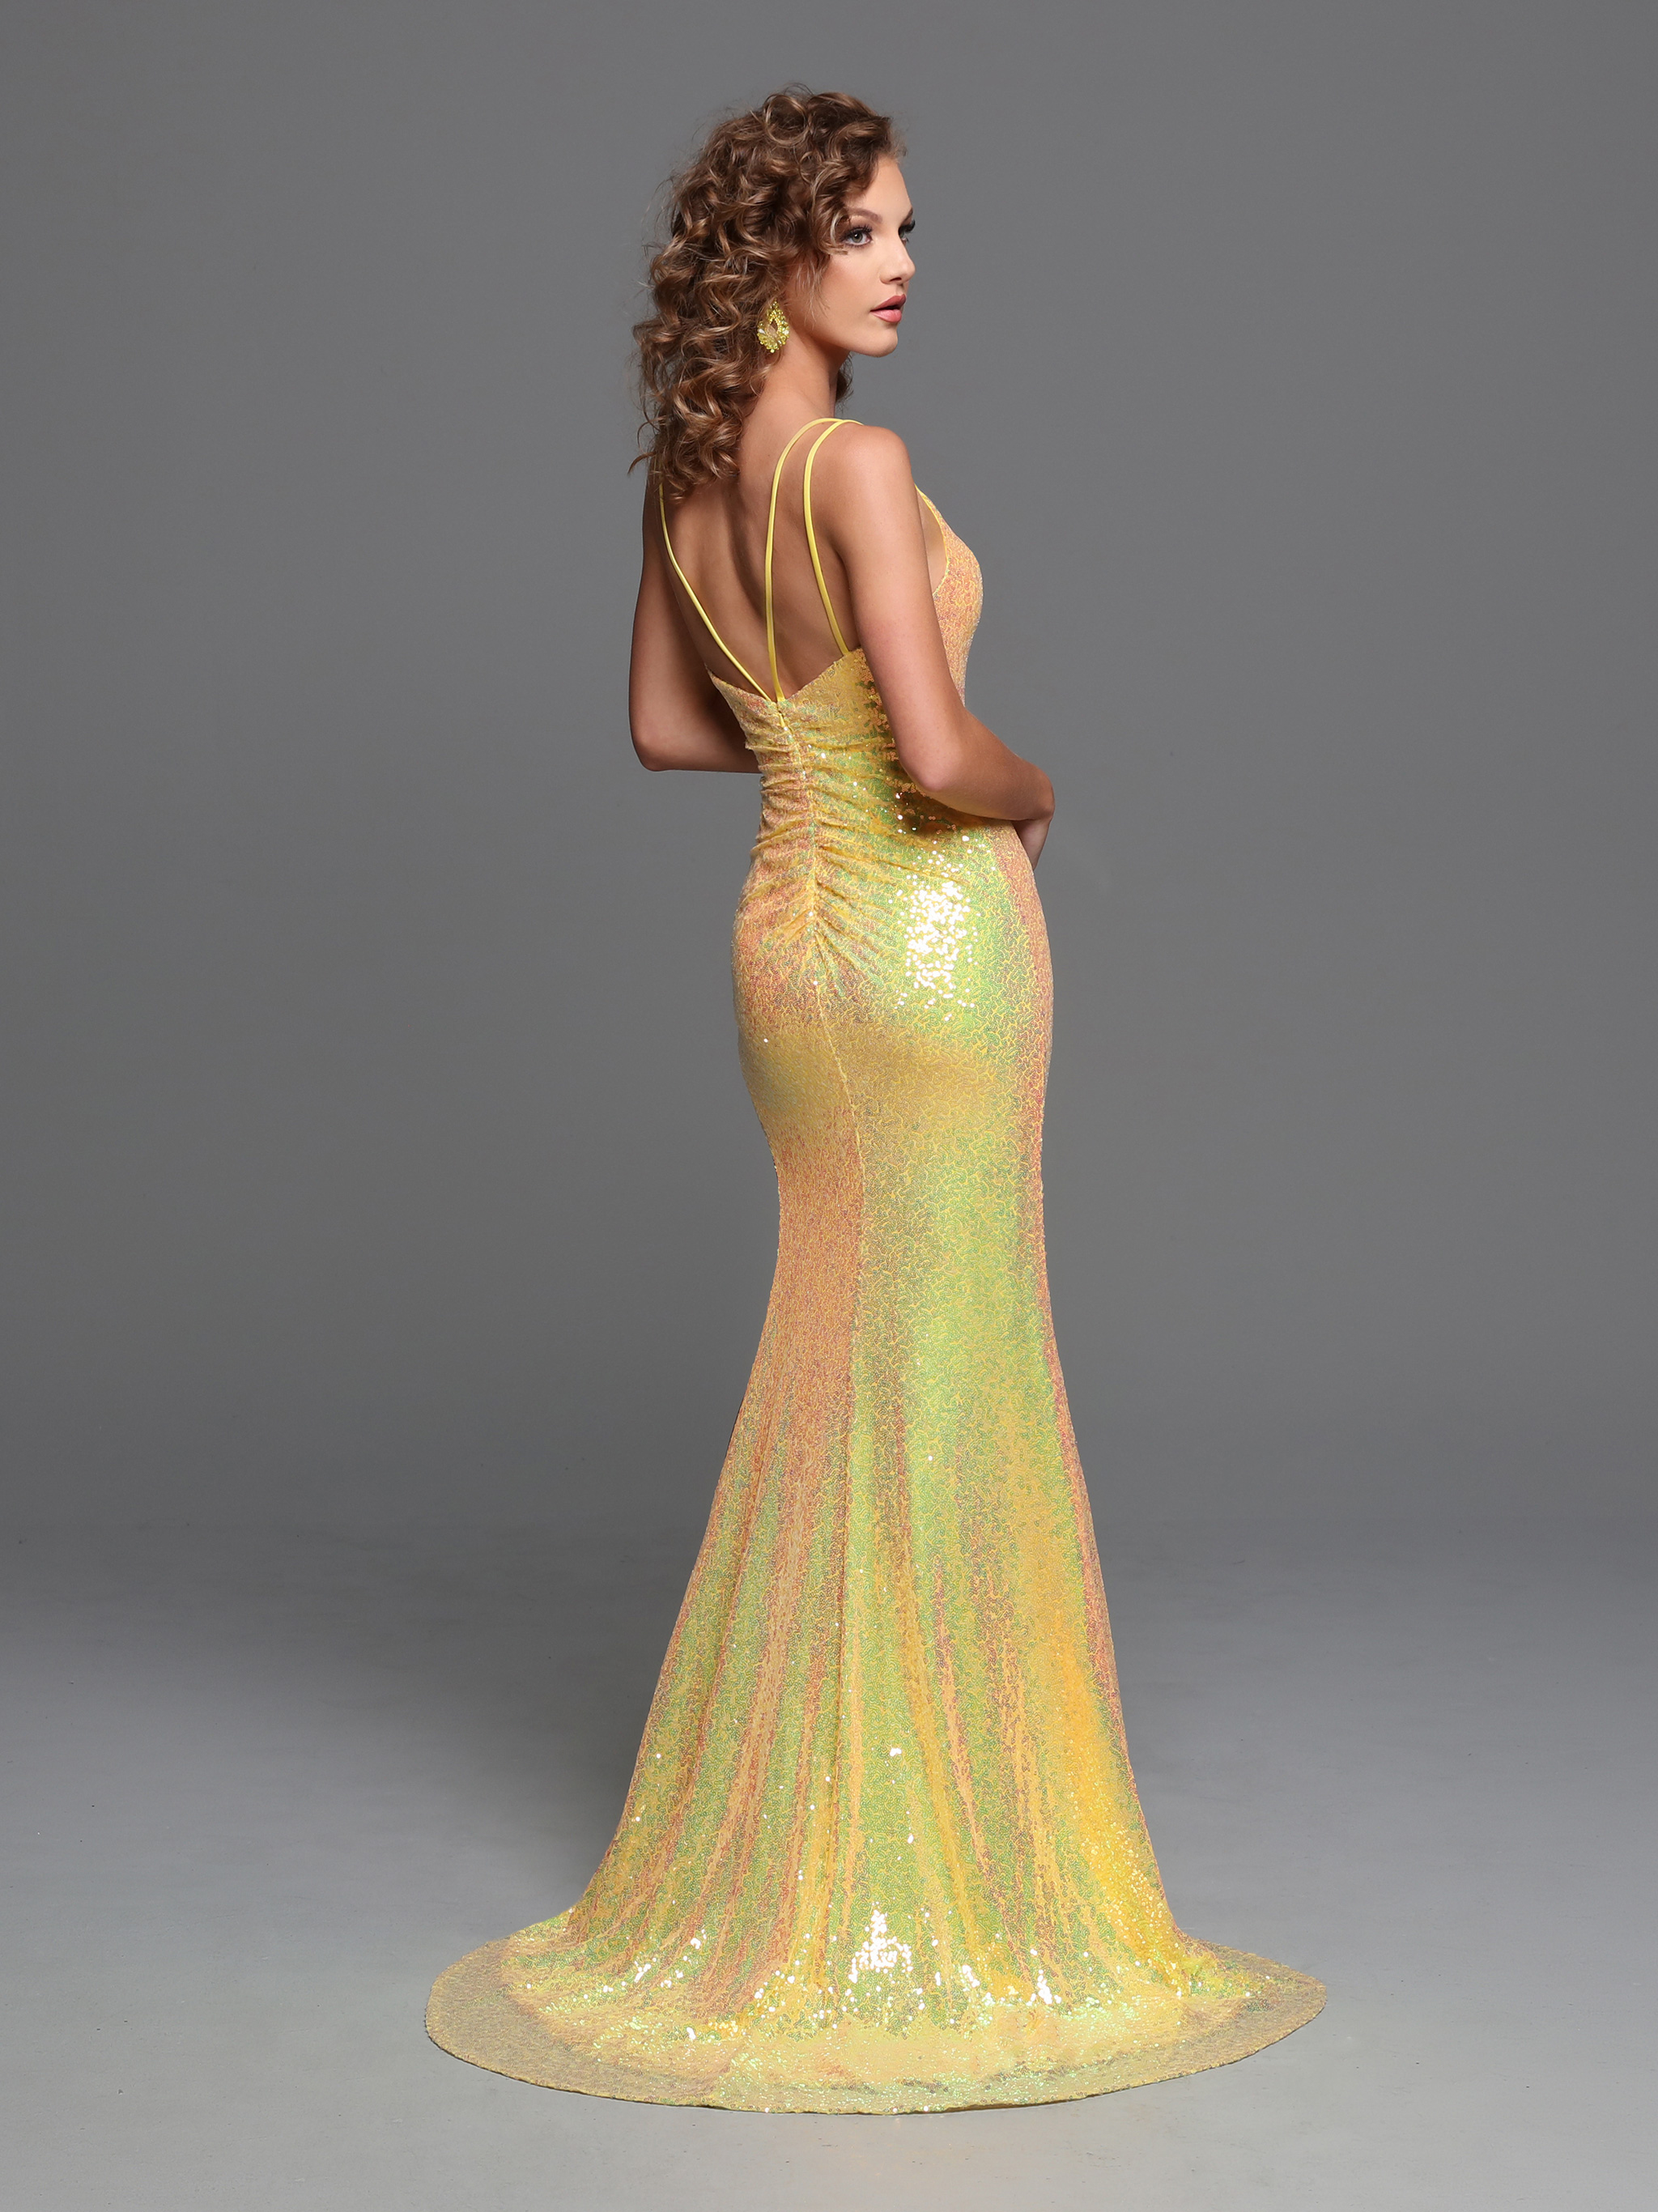 Image showing back view of style #72252